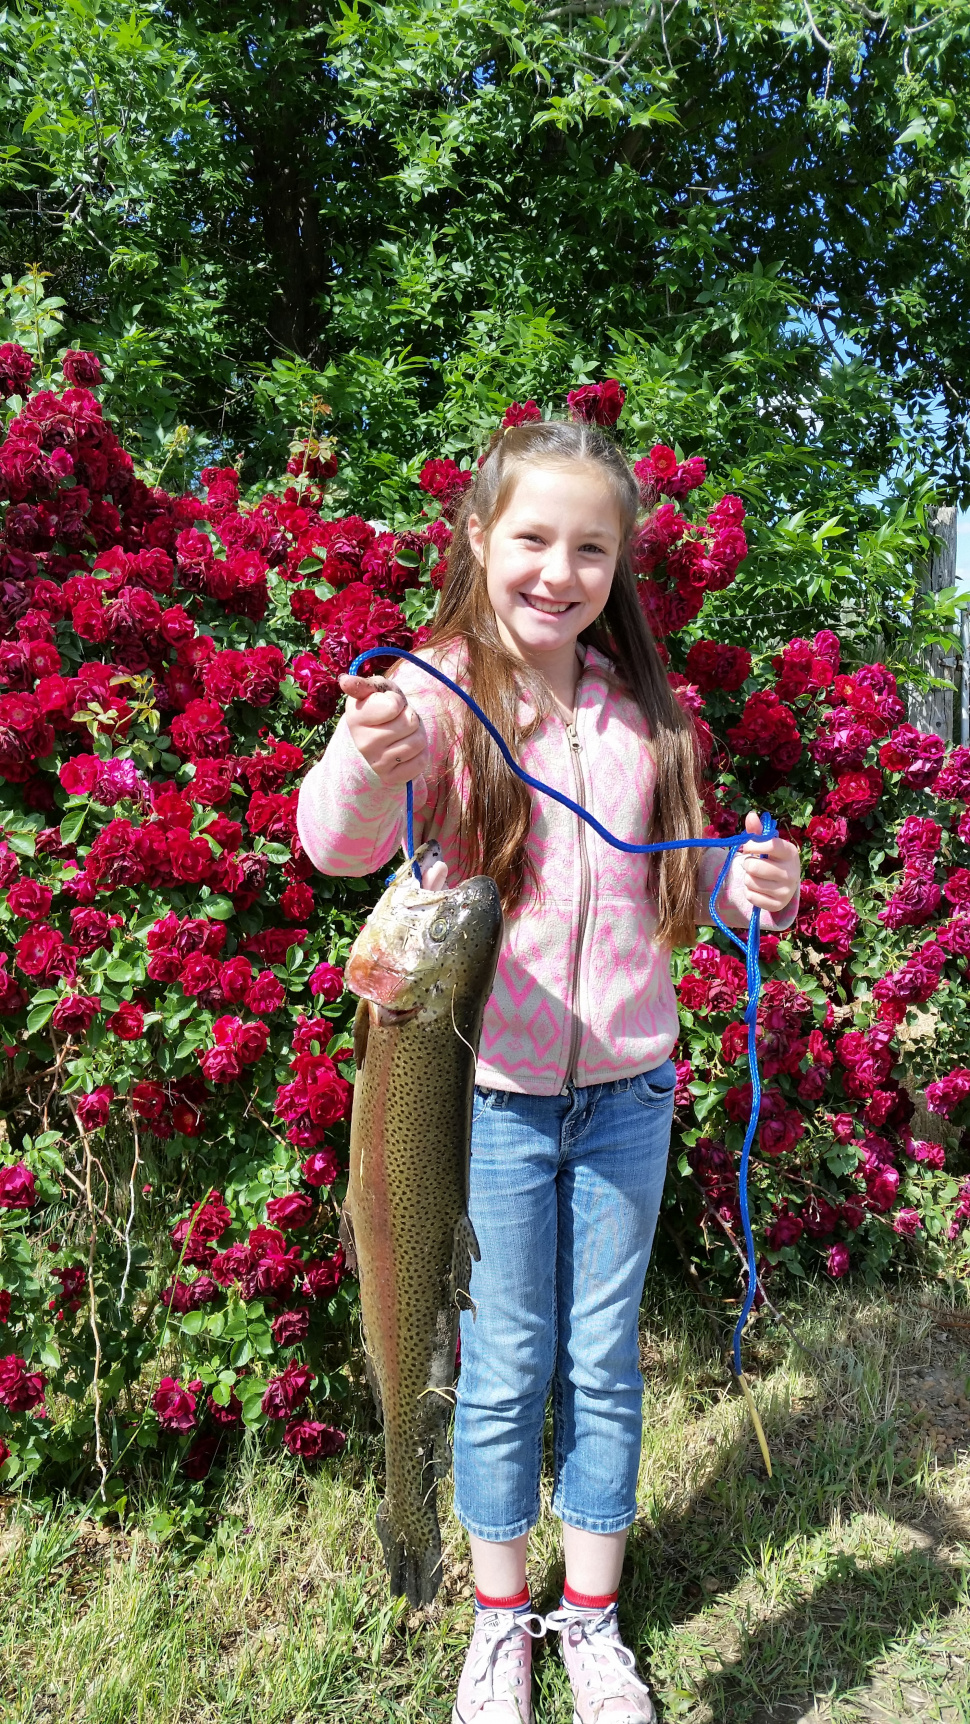 No matter where you live in Idaho, Free Fishing Day on June 11 offers